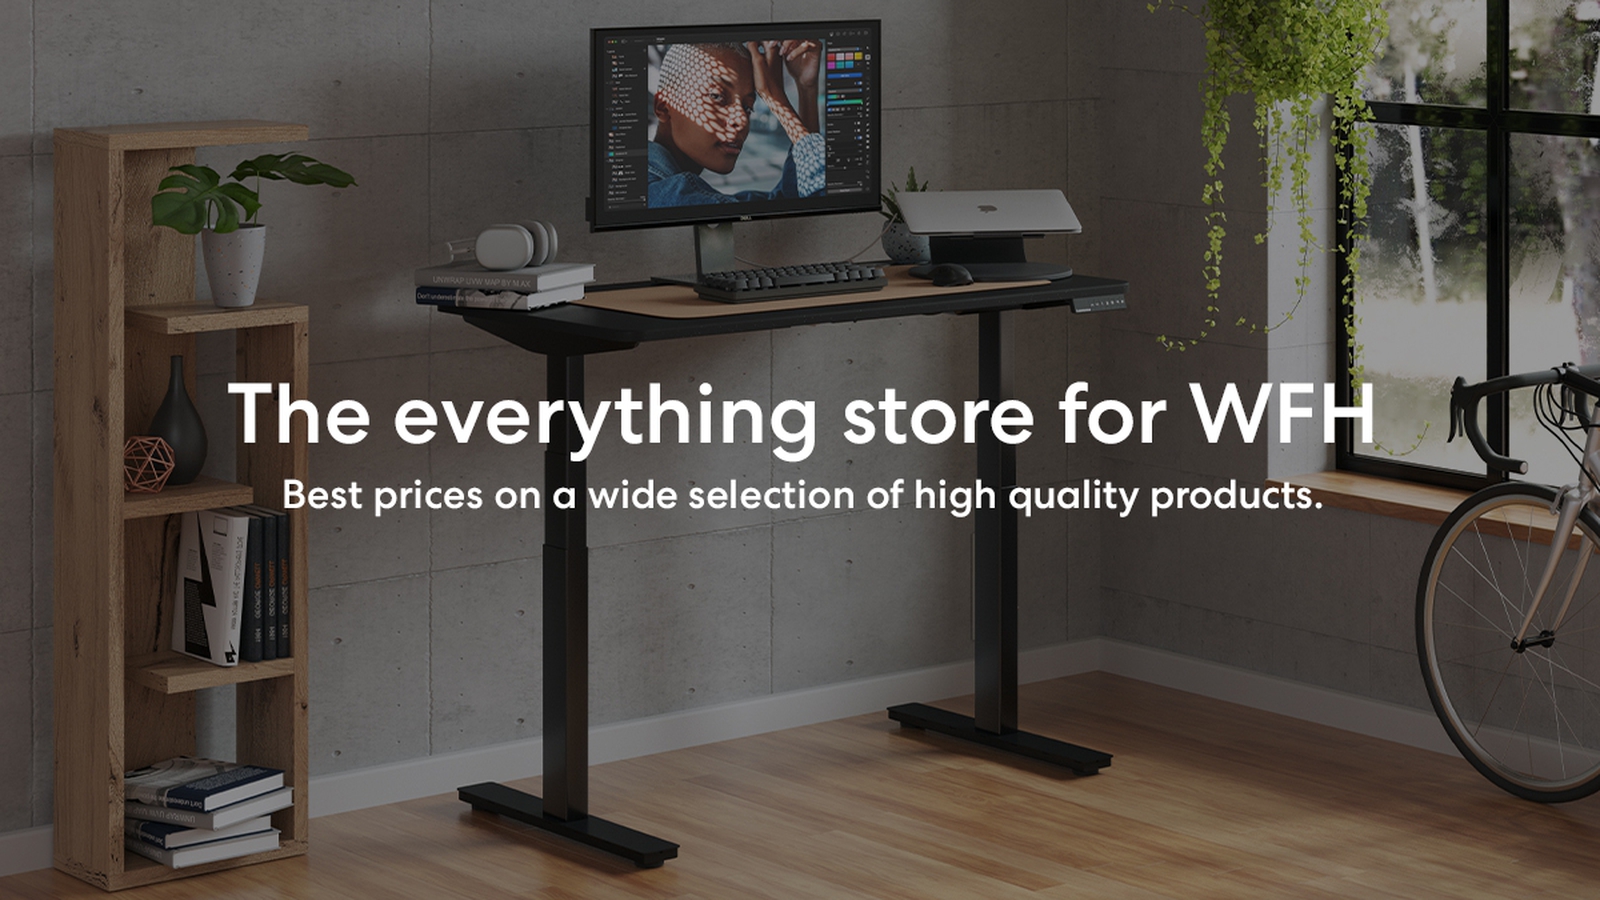 The everything store for WFH with best price & high quality products!